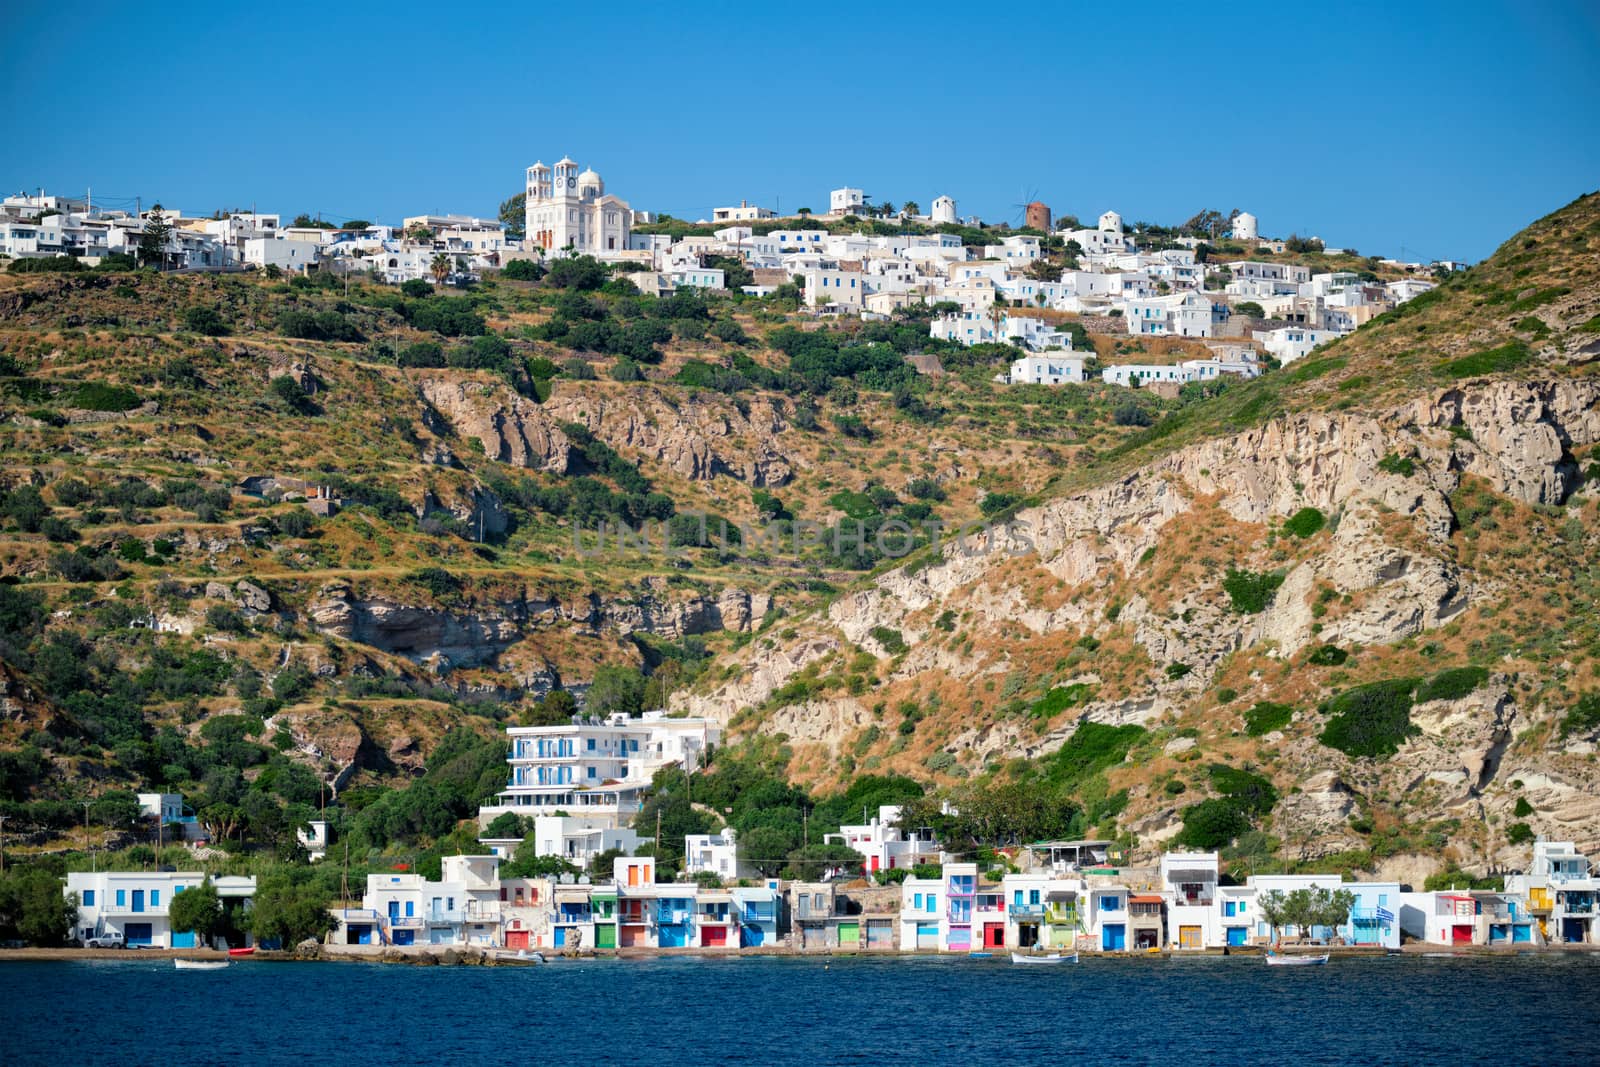 Klima and Plaka villages with whitewhashed traditional houses and orthodox church and windmills on Milos island, Greece